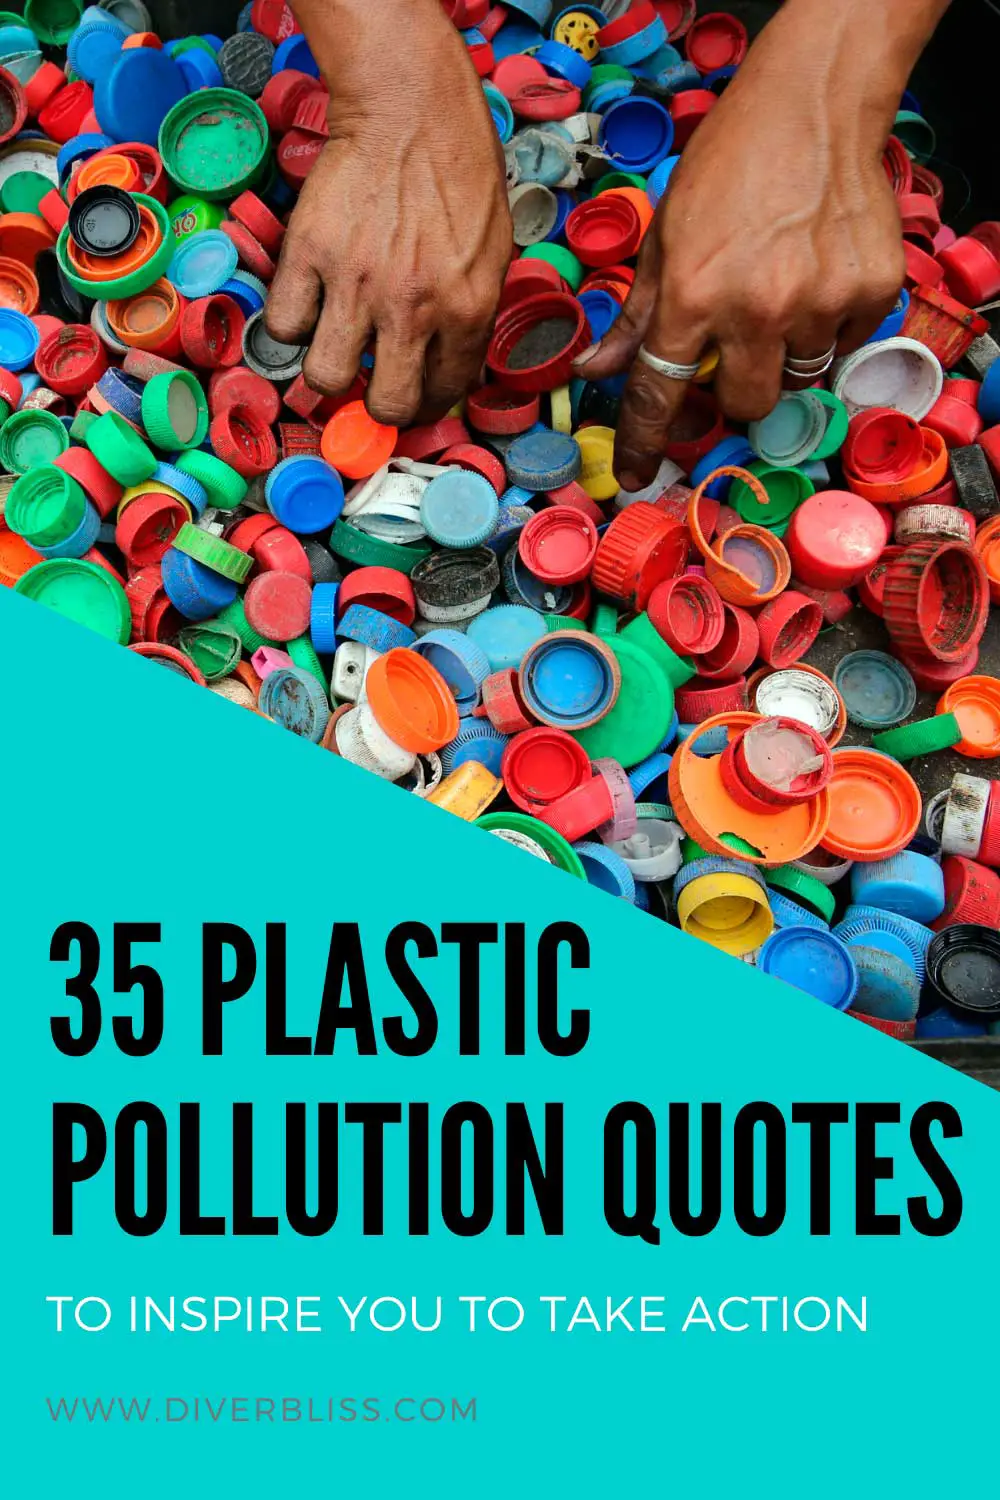 35 plastic pollution quotes to inspire you to take action